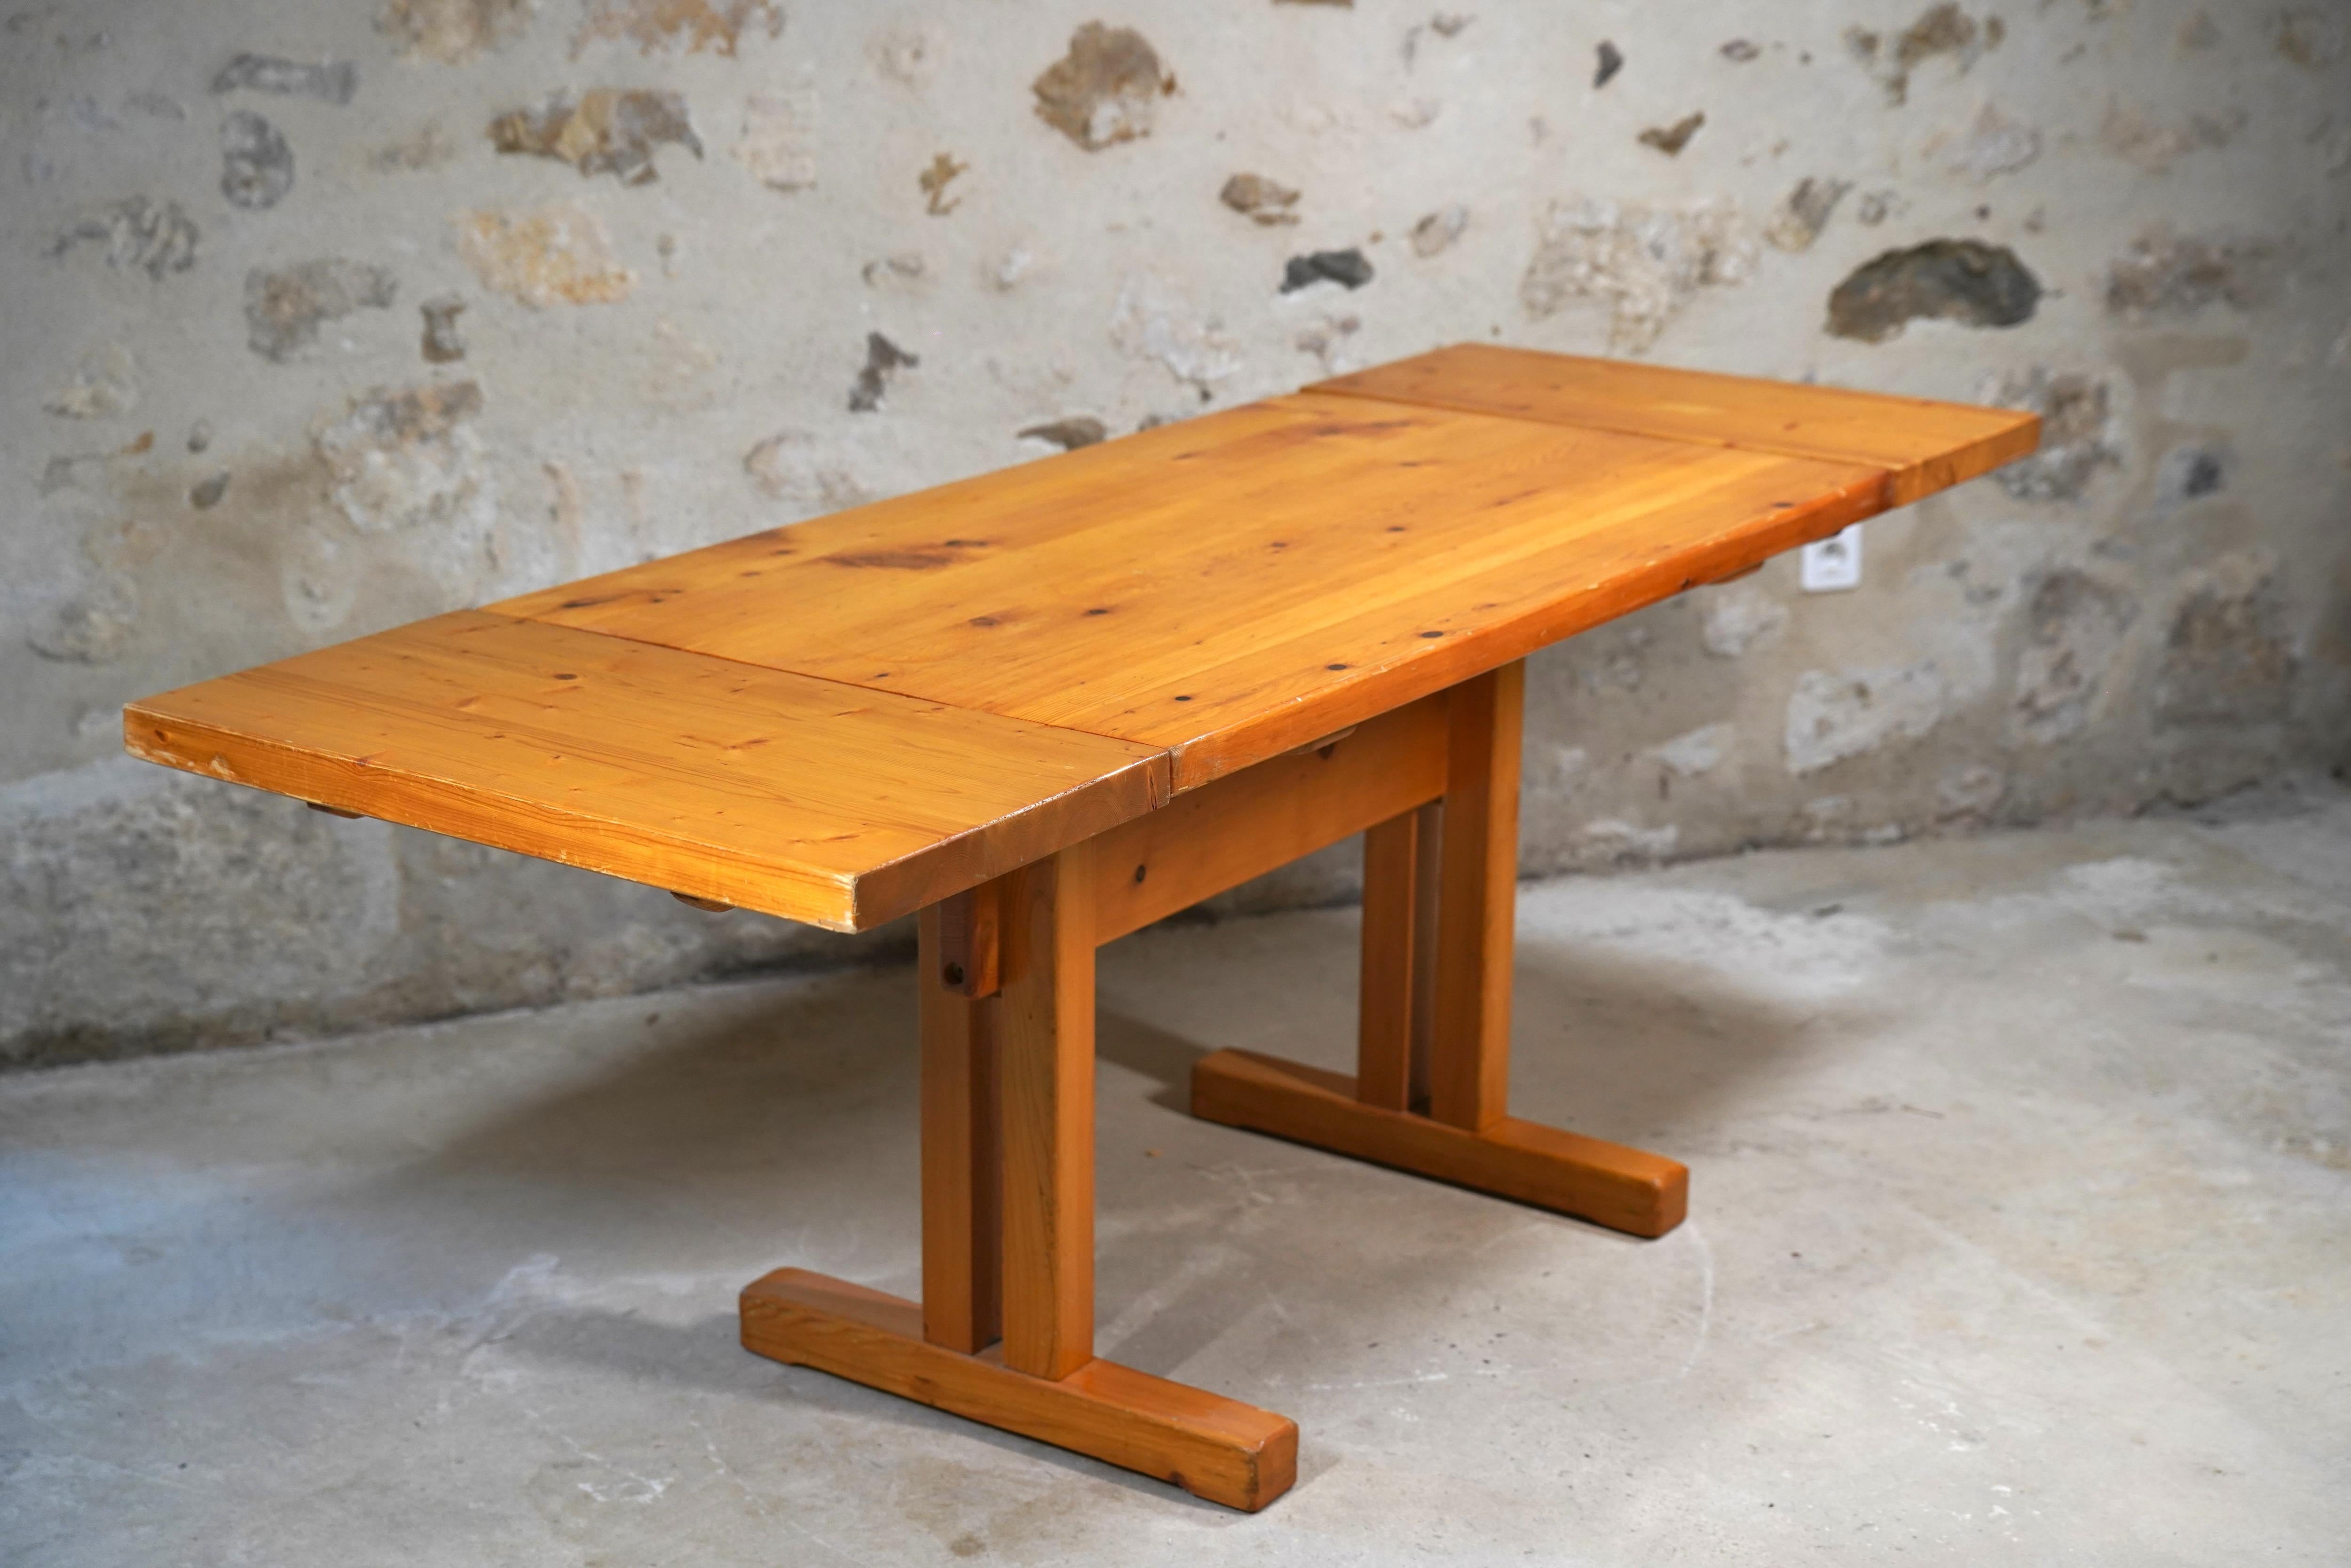 Mid-Century Modern Rare Charlotte Perriand Drop Leaf Dining Table from Les Arcs, France c. 1970